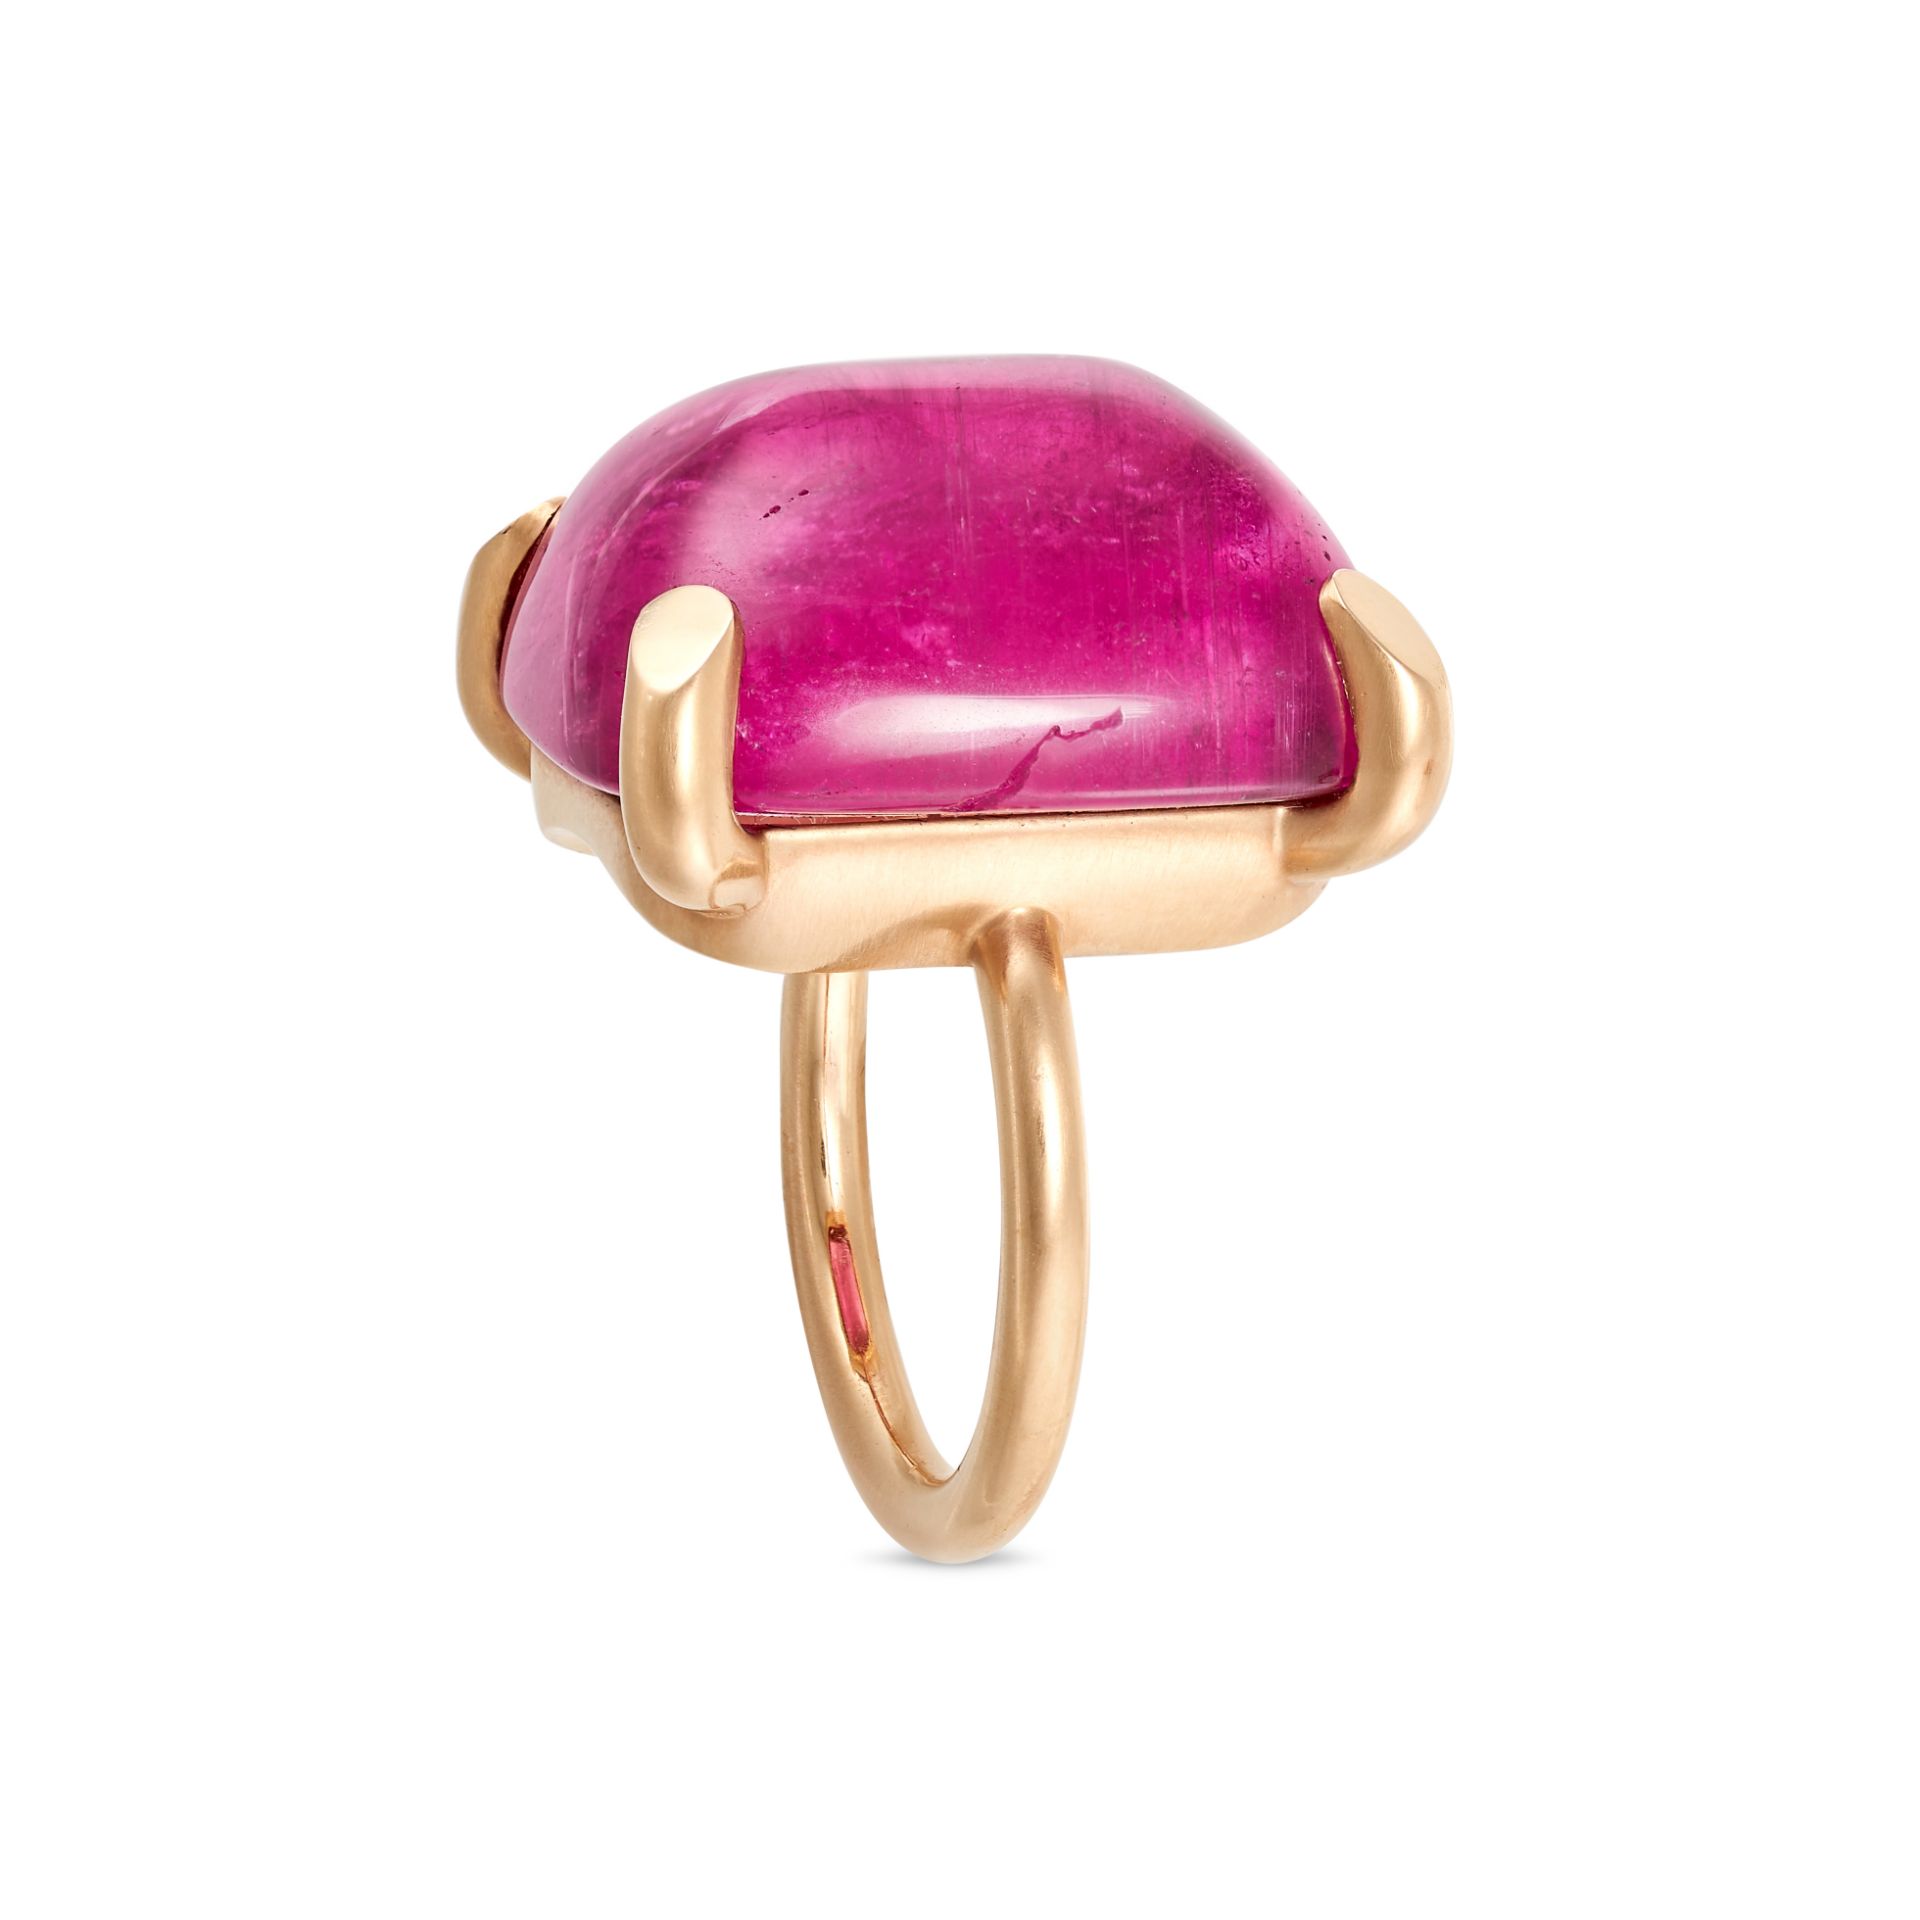 A PINK TOURMALINE RING in 18ct rose gold, set with a sugarloaf cabochon pink tourmaline of 38.33 ... - Image 2 of 2